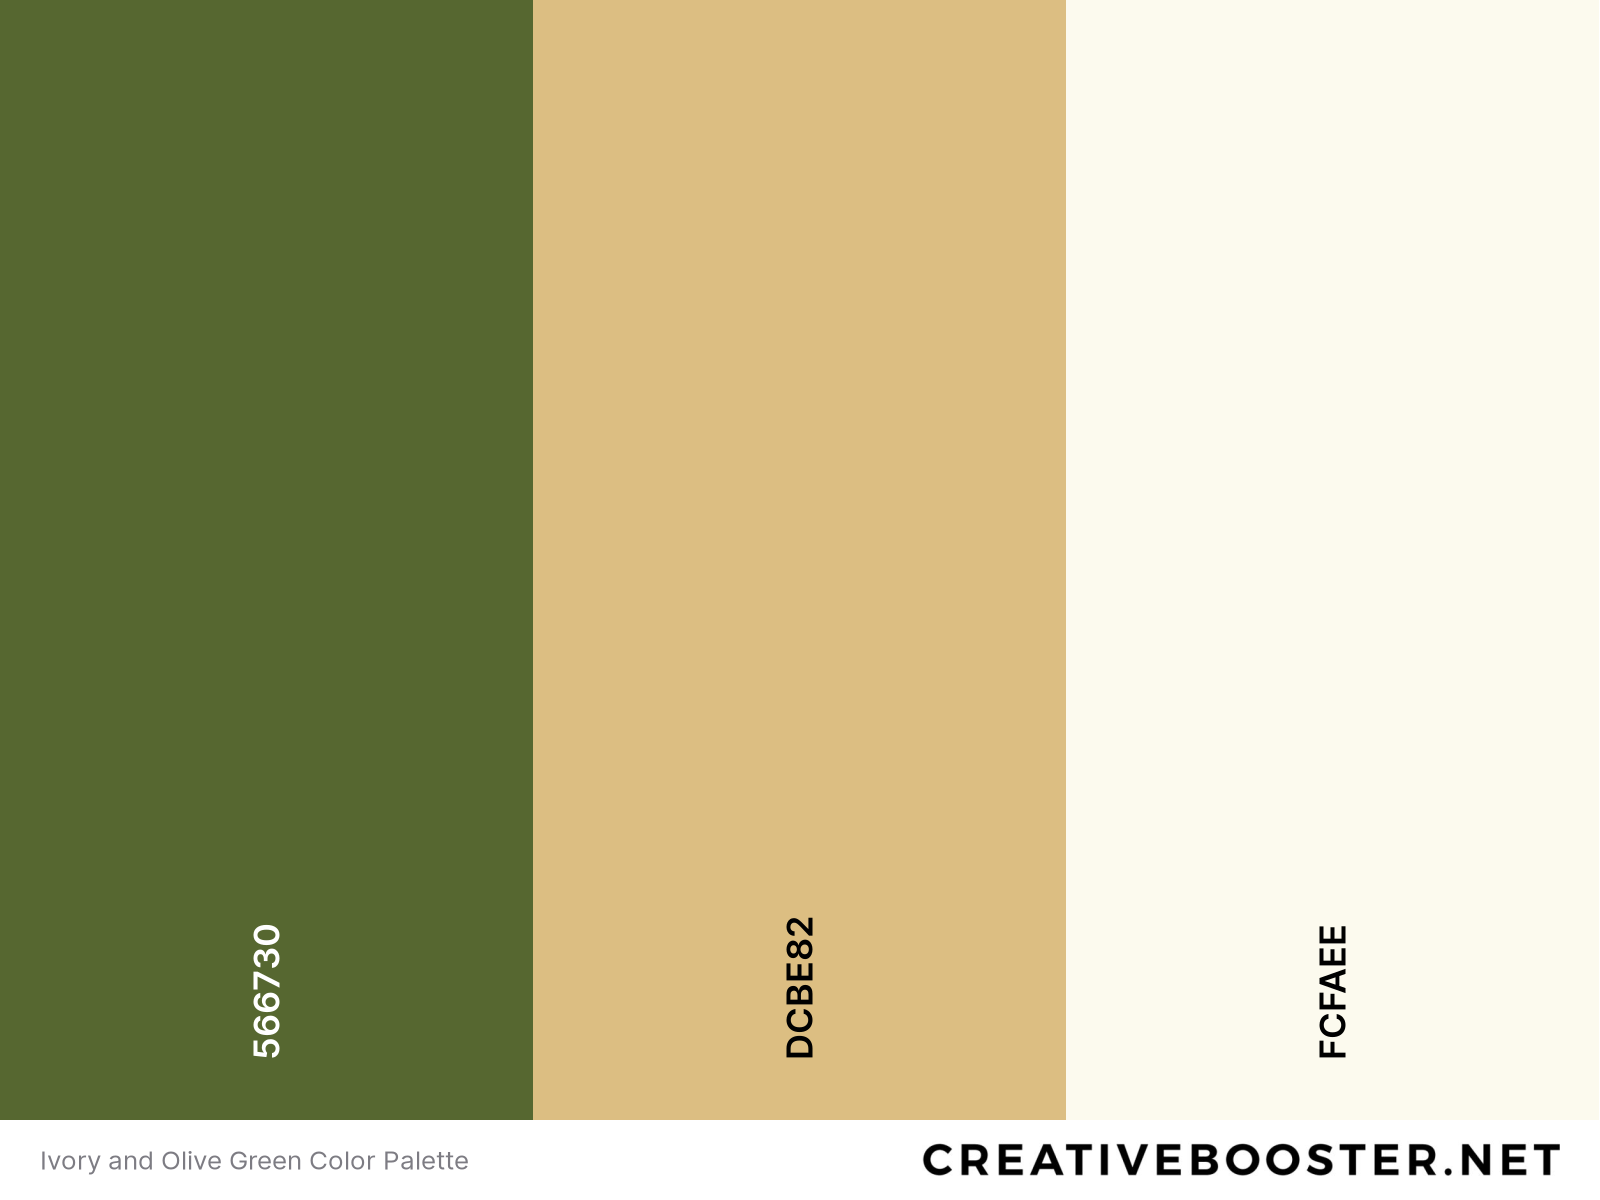 Ivory and Olive Green Color Palette